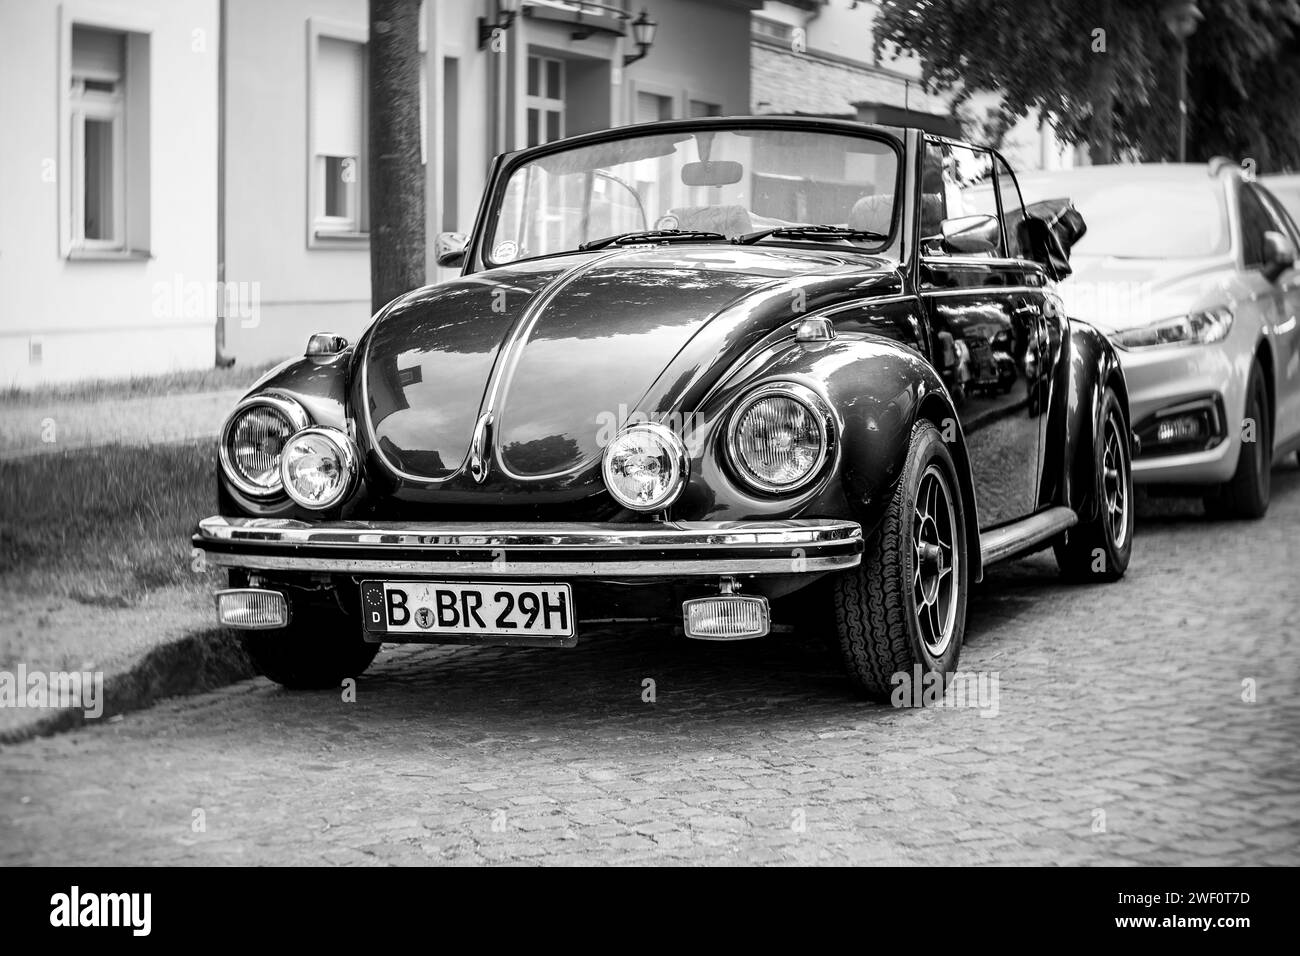 WERDER (HAVEL), GERMANY - MAY 20, 2023: The subcompact, economy car Volkswagen Beetle Convertible. Swirl bokeh, art lens. Black and white. Stock Photo